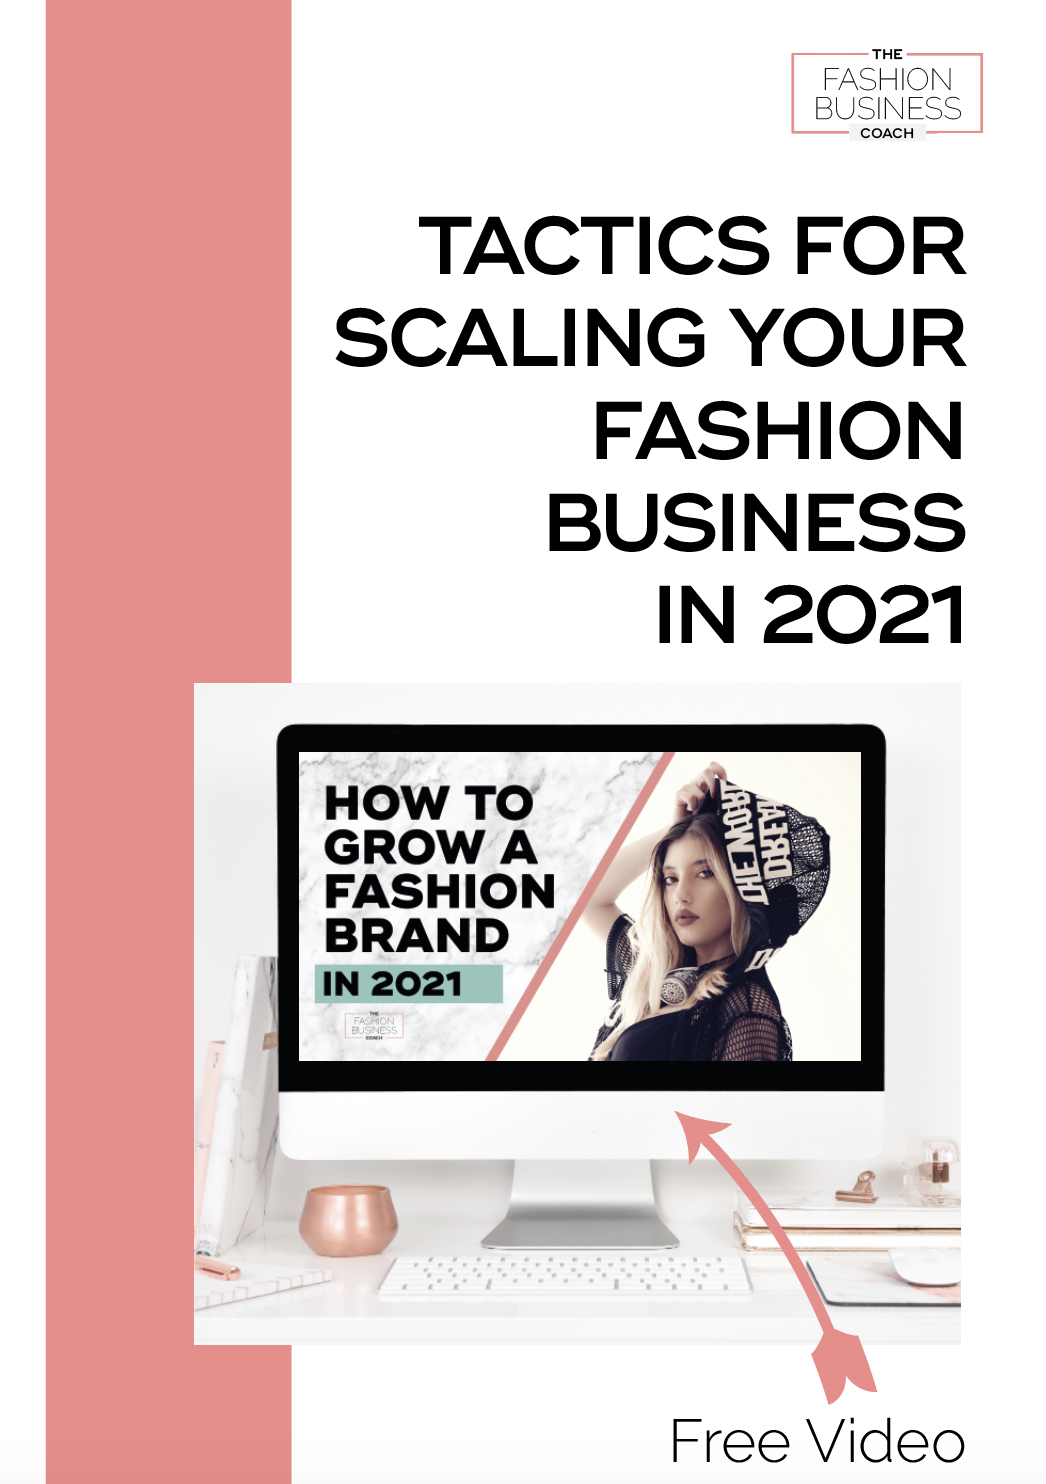 Tactics for Scaling Your Fashion Business in 2021 3.png